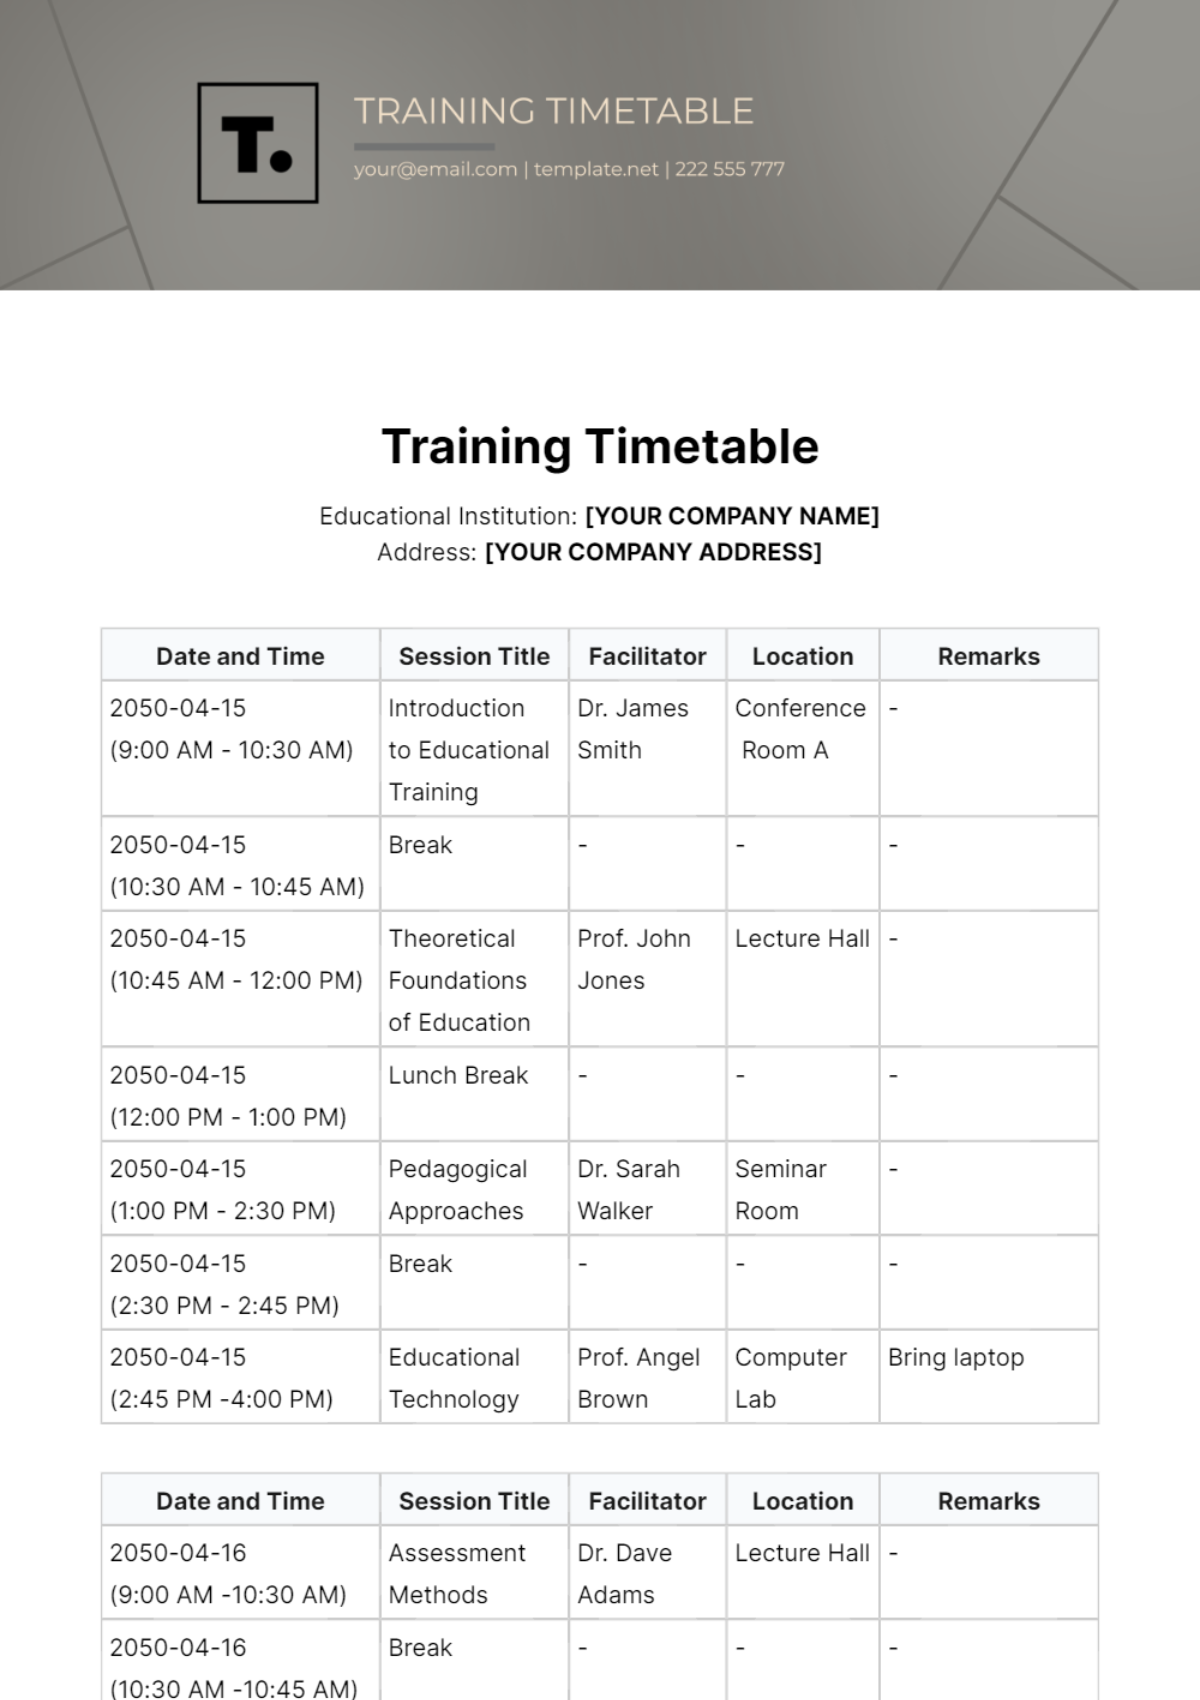 Training Timetable Template